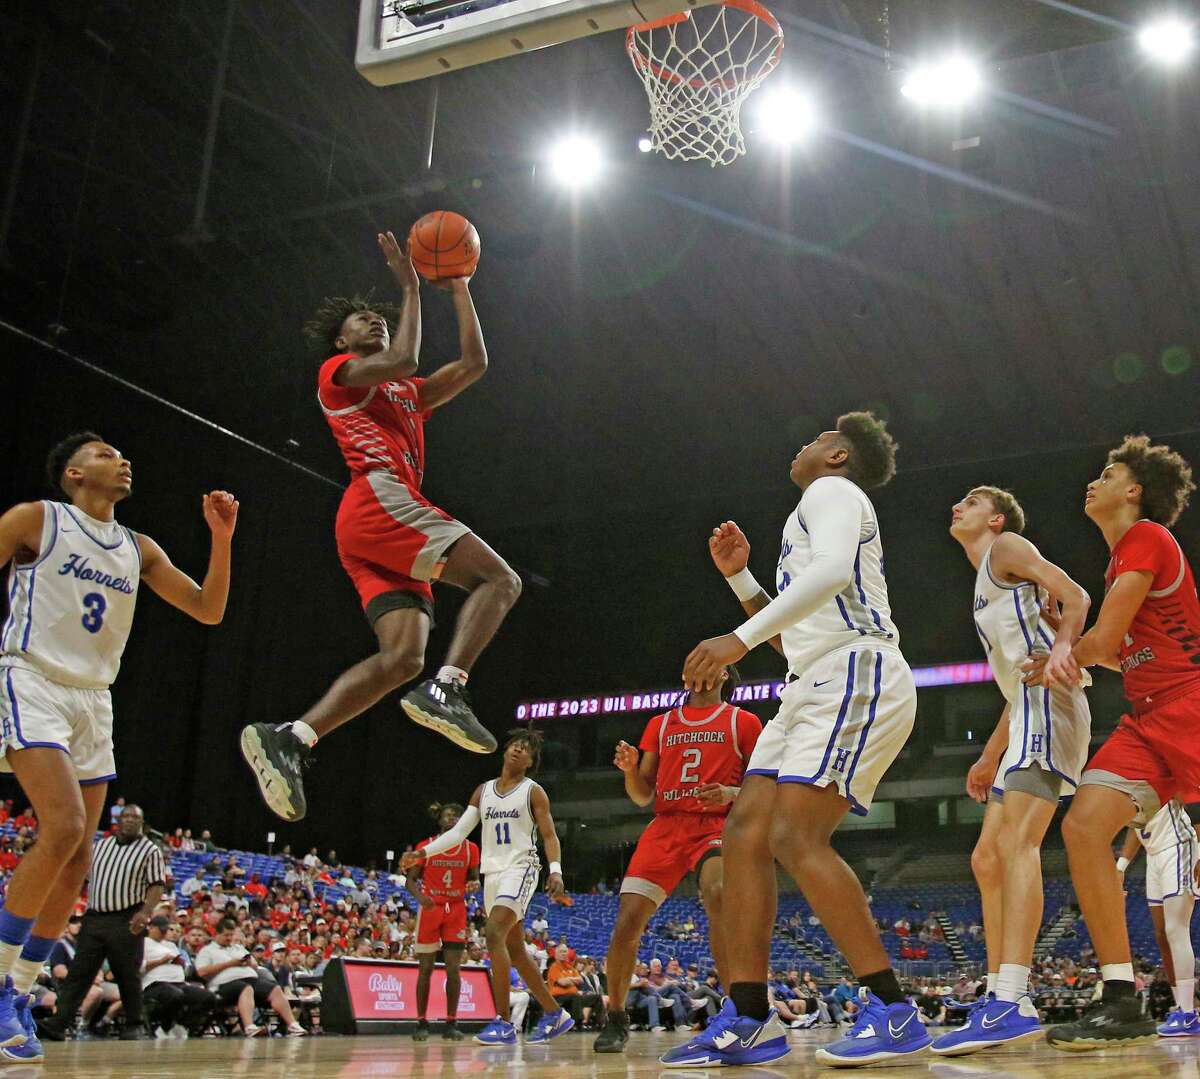 Hitchock Kelshaun Johnson (1) drives for two in first half. Hitchcock defeated Hooks 69-36 in Class 3A semifinals on Thursday, March 9,2023 at the Alamodome.